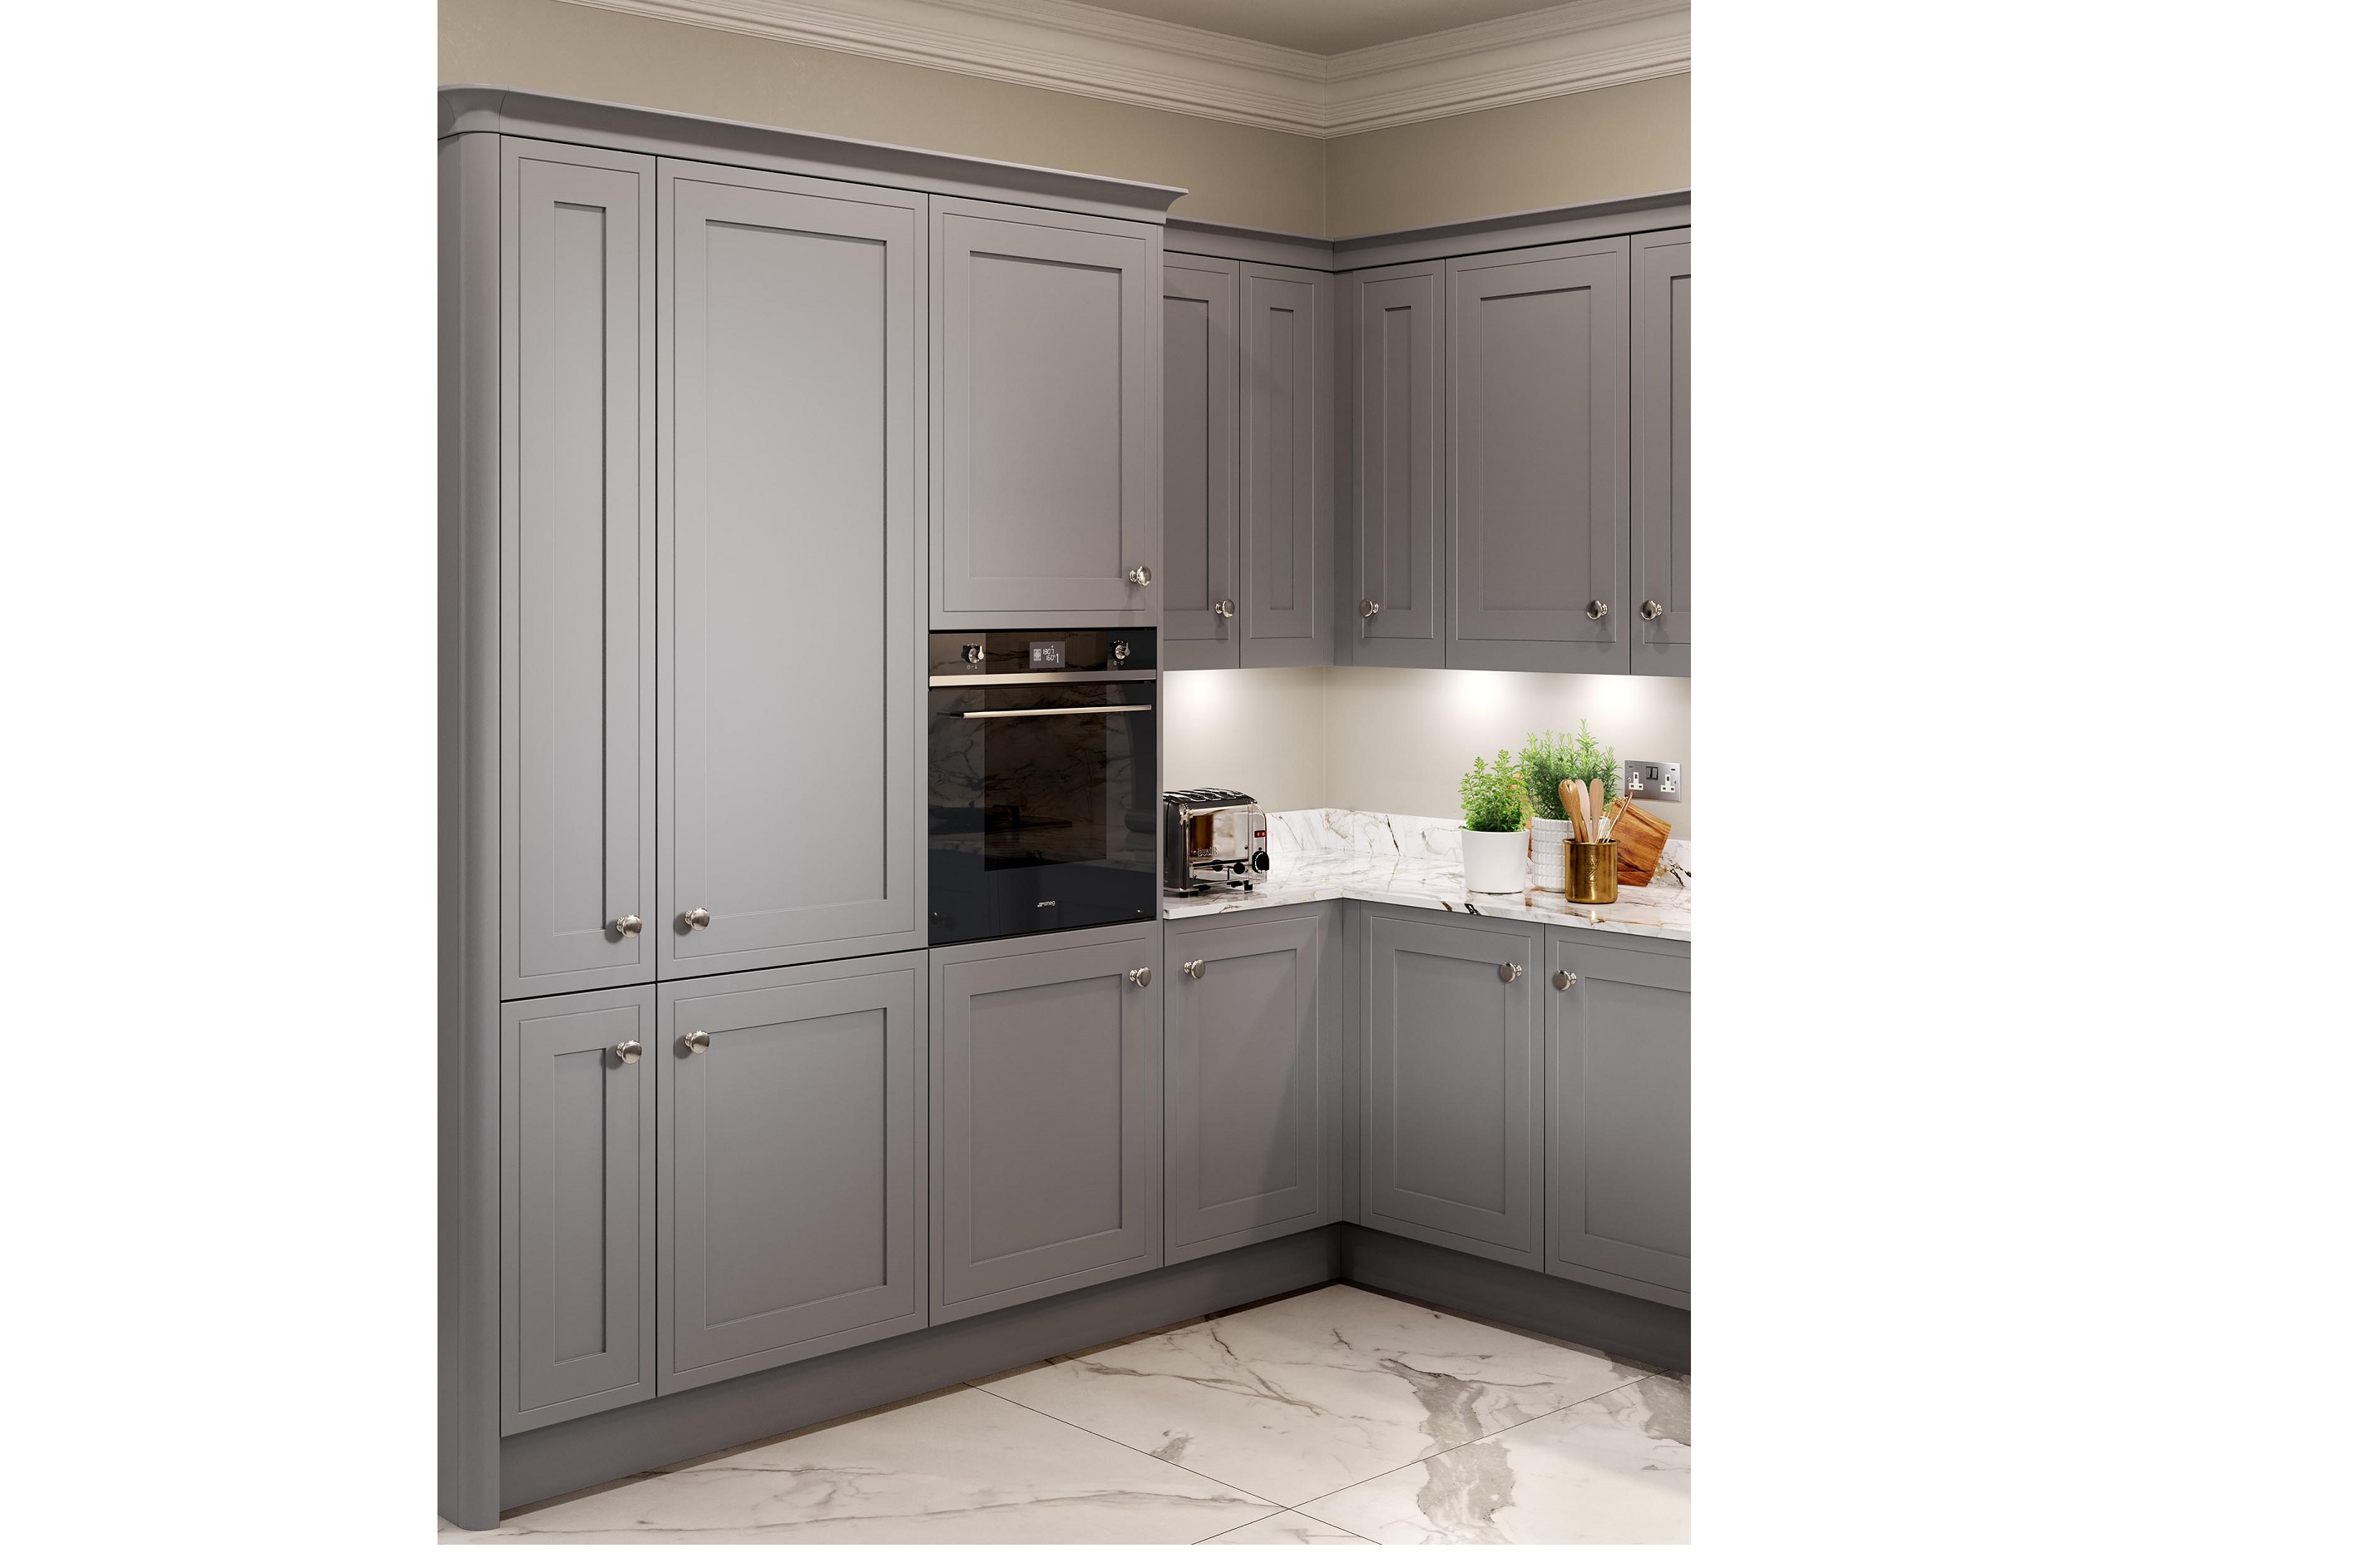 Smooth-finish shaker-style kitchen painted dust grey featuring eye-level integrated oven 